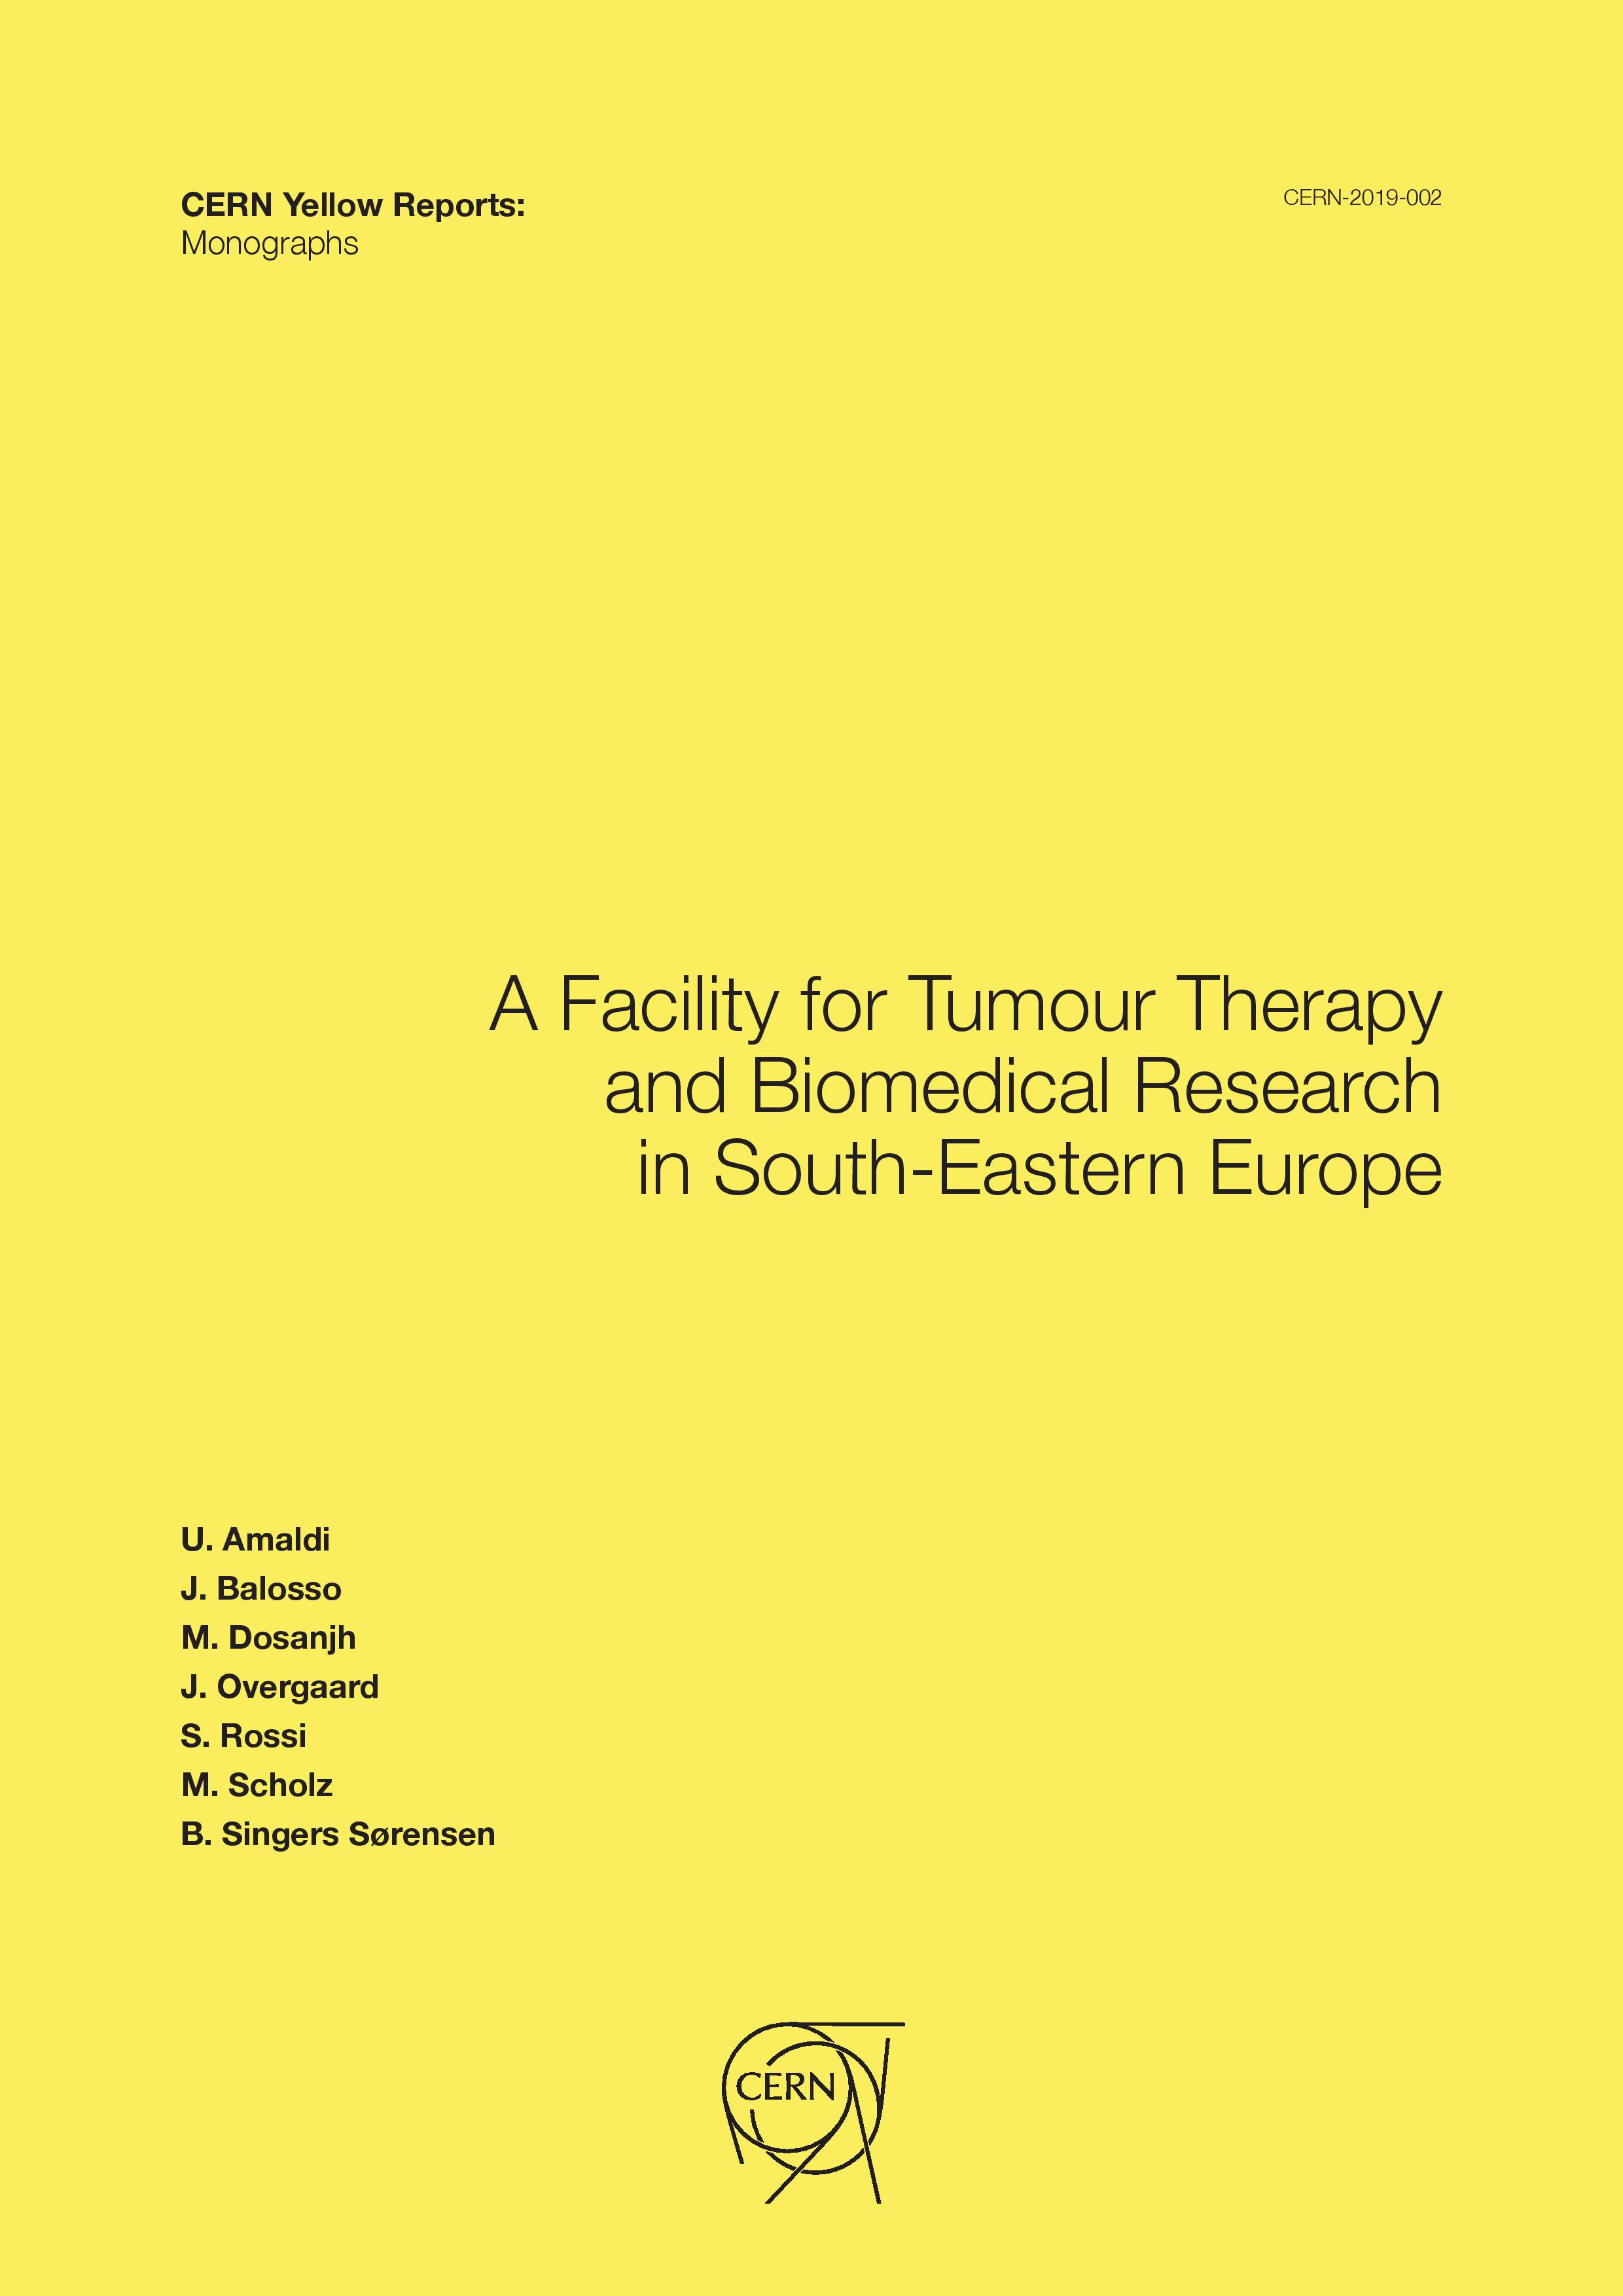 					View Vol. 2 (2019): A Facility for Tumour Therapy and Biomedical Research in South-Eastern Europe
				